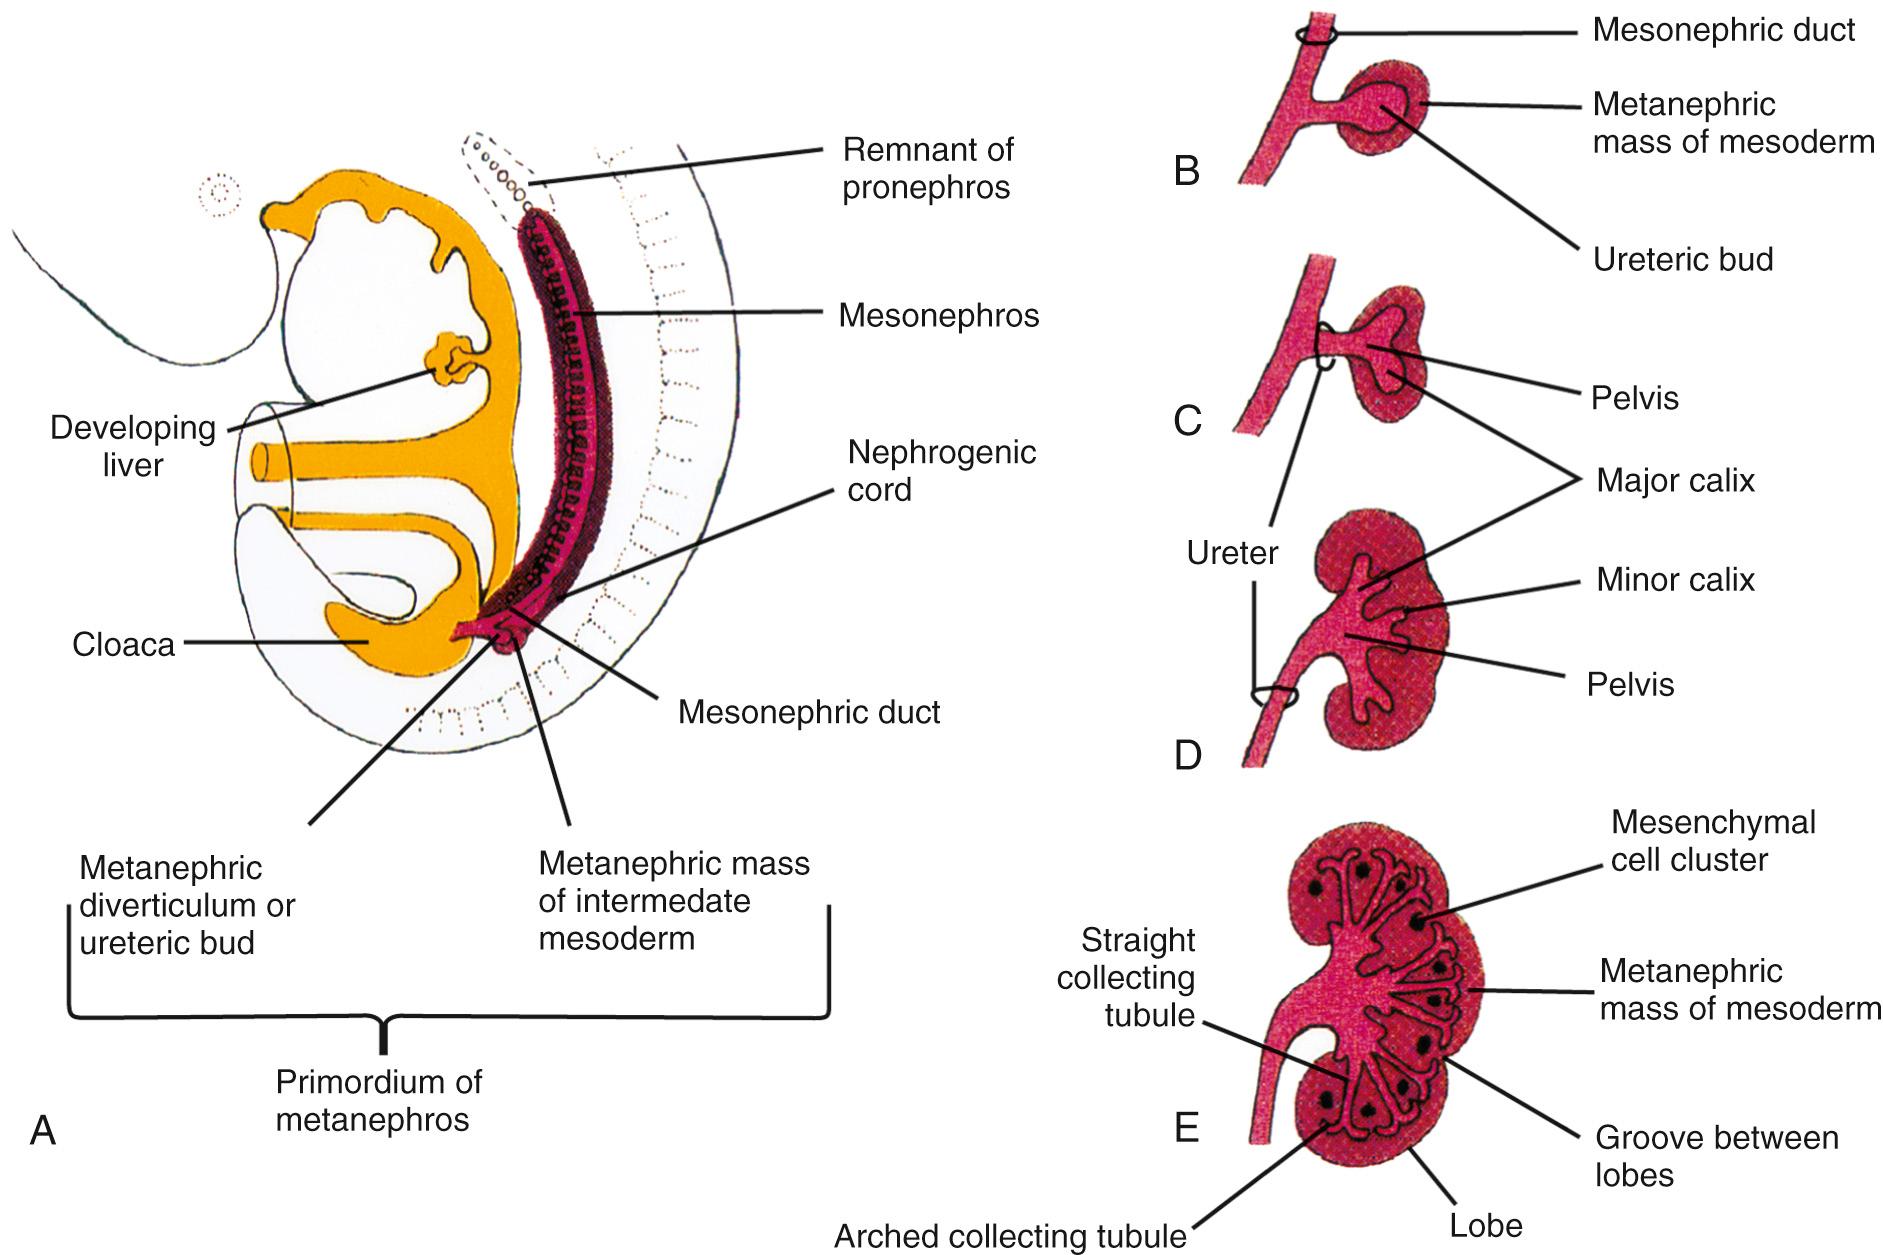 FIG. 9.1, Embryology of the Kidney and Ureter.